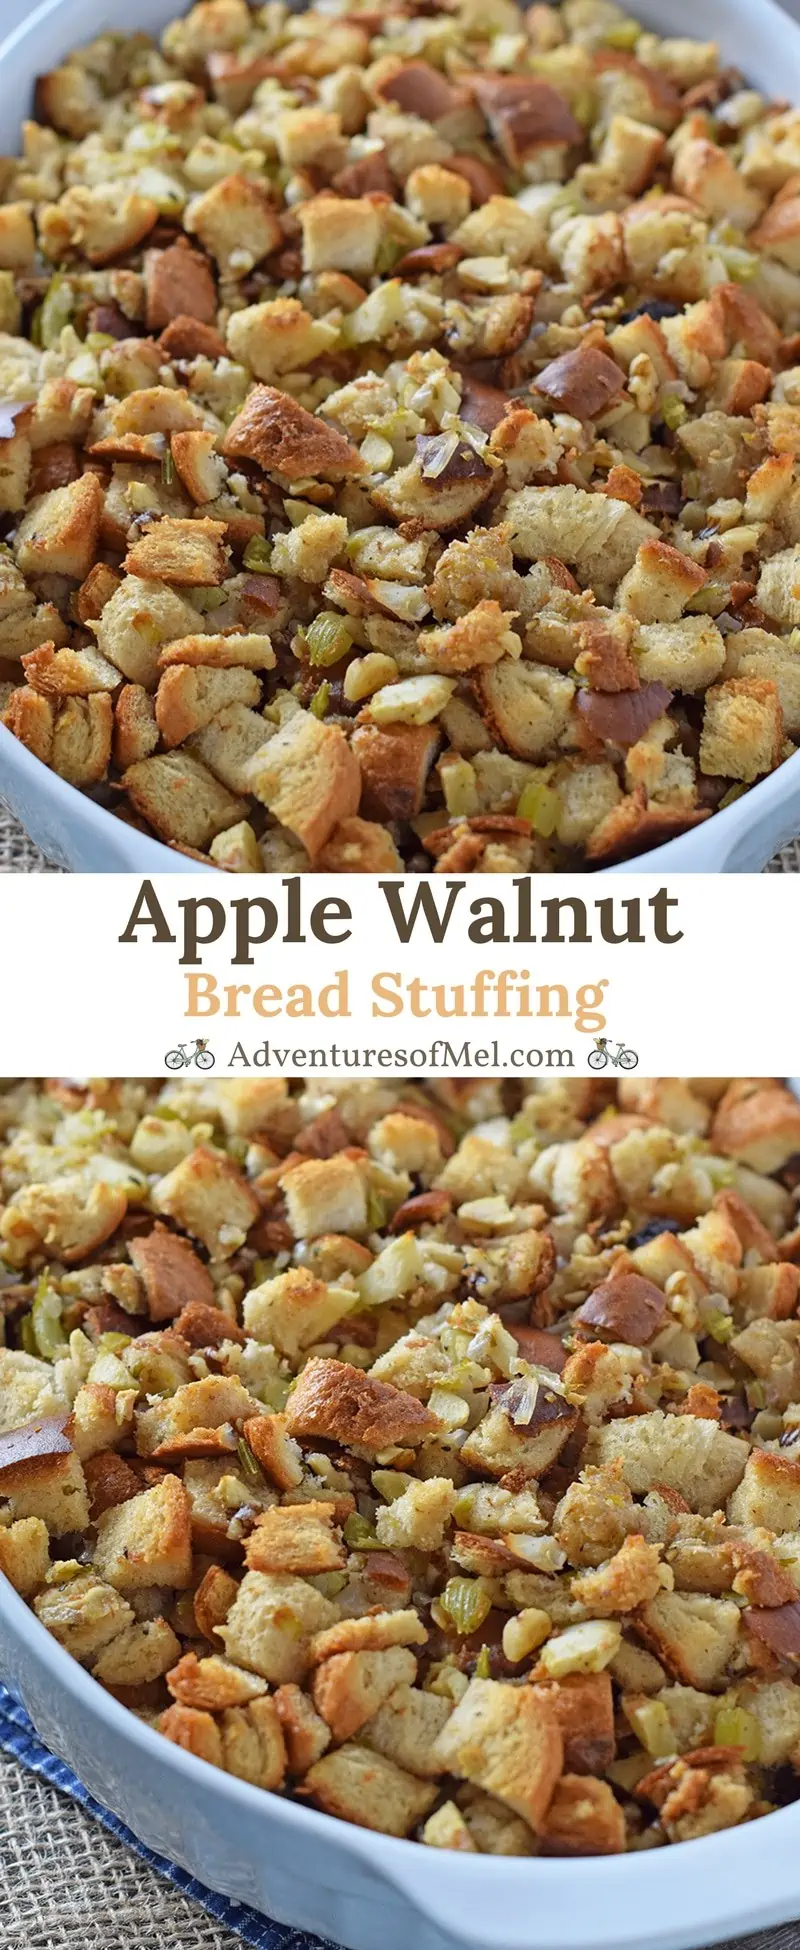 Apple Walnut Bread Stuffing, an easy, traditional, old-fashioned, homemade recipe. Simple ingredients in a delicious Thanksgiving side everyone will love!